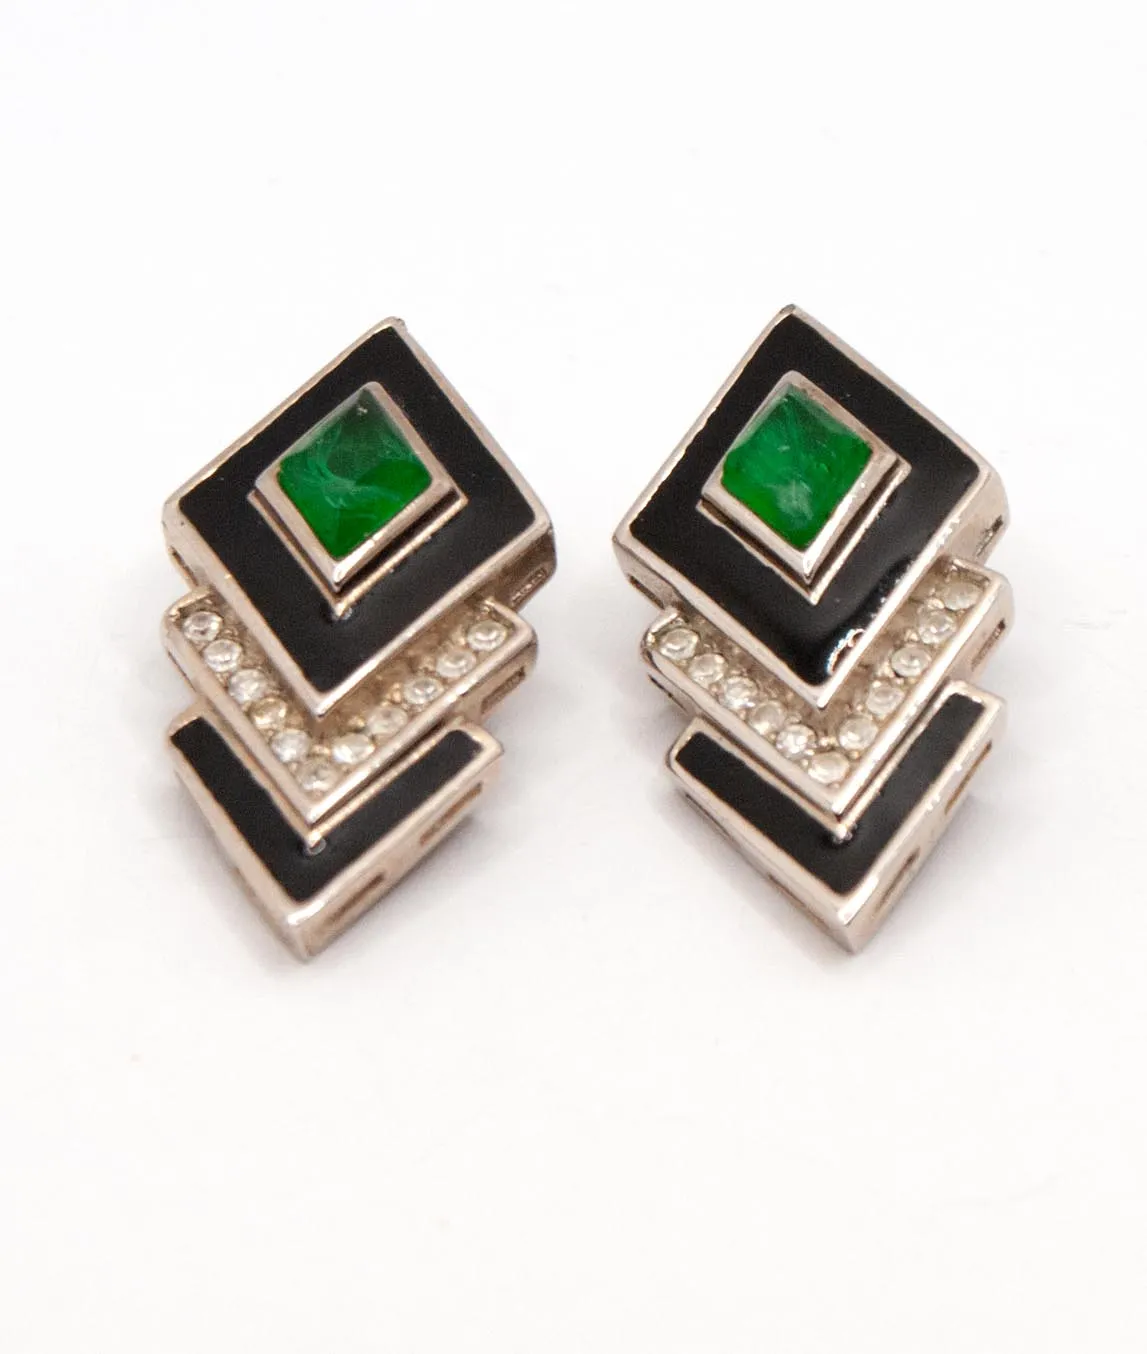 Black and green earrings in an art deco style with rhinestones by Christian Dior